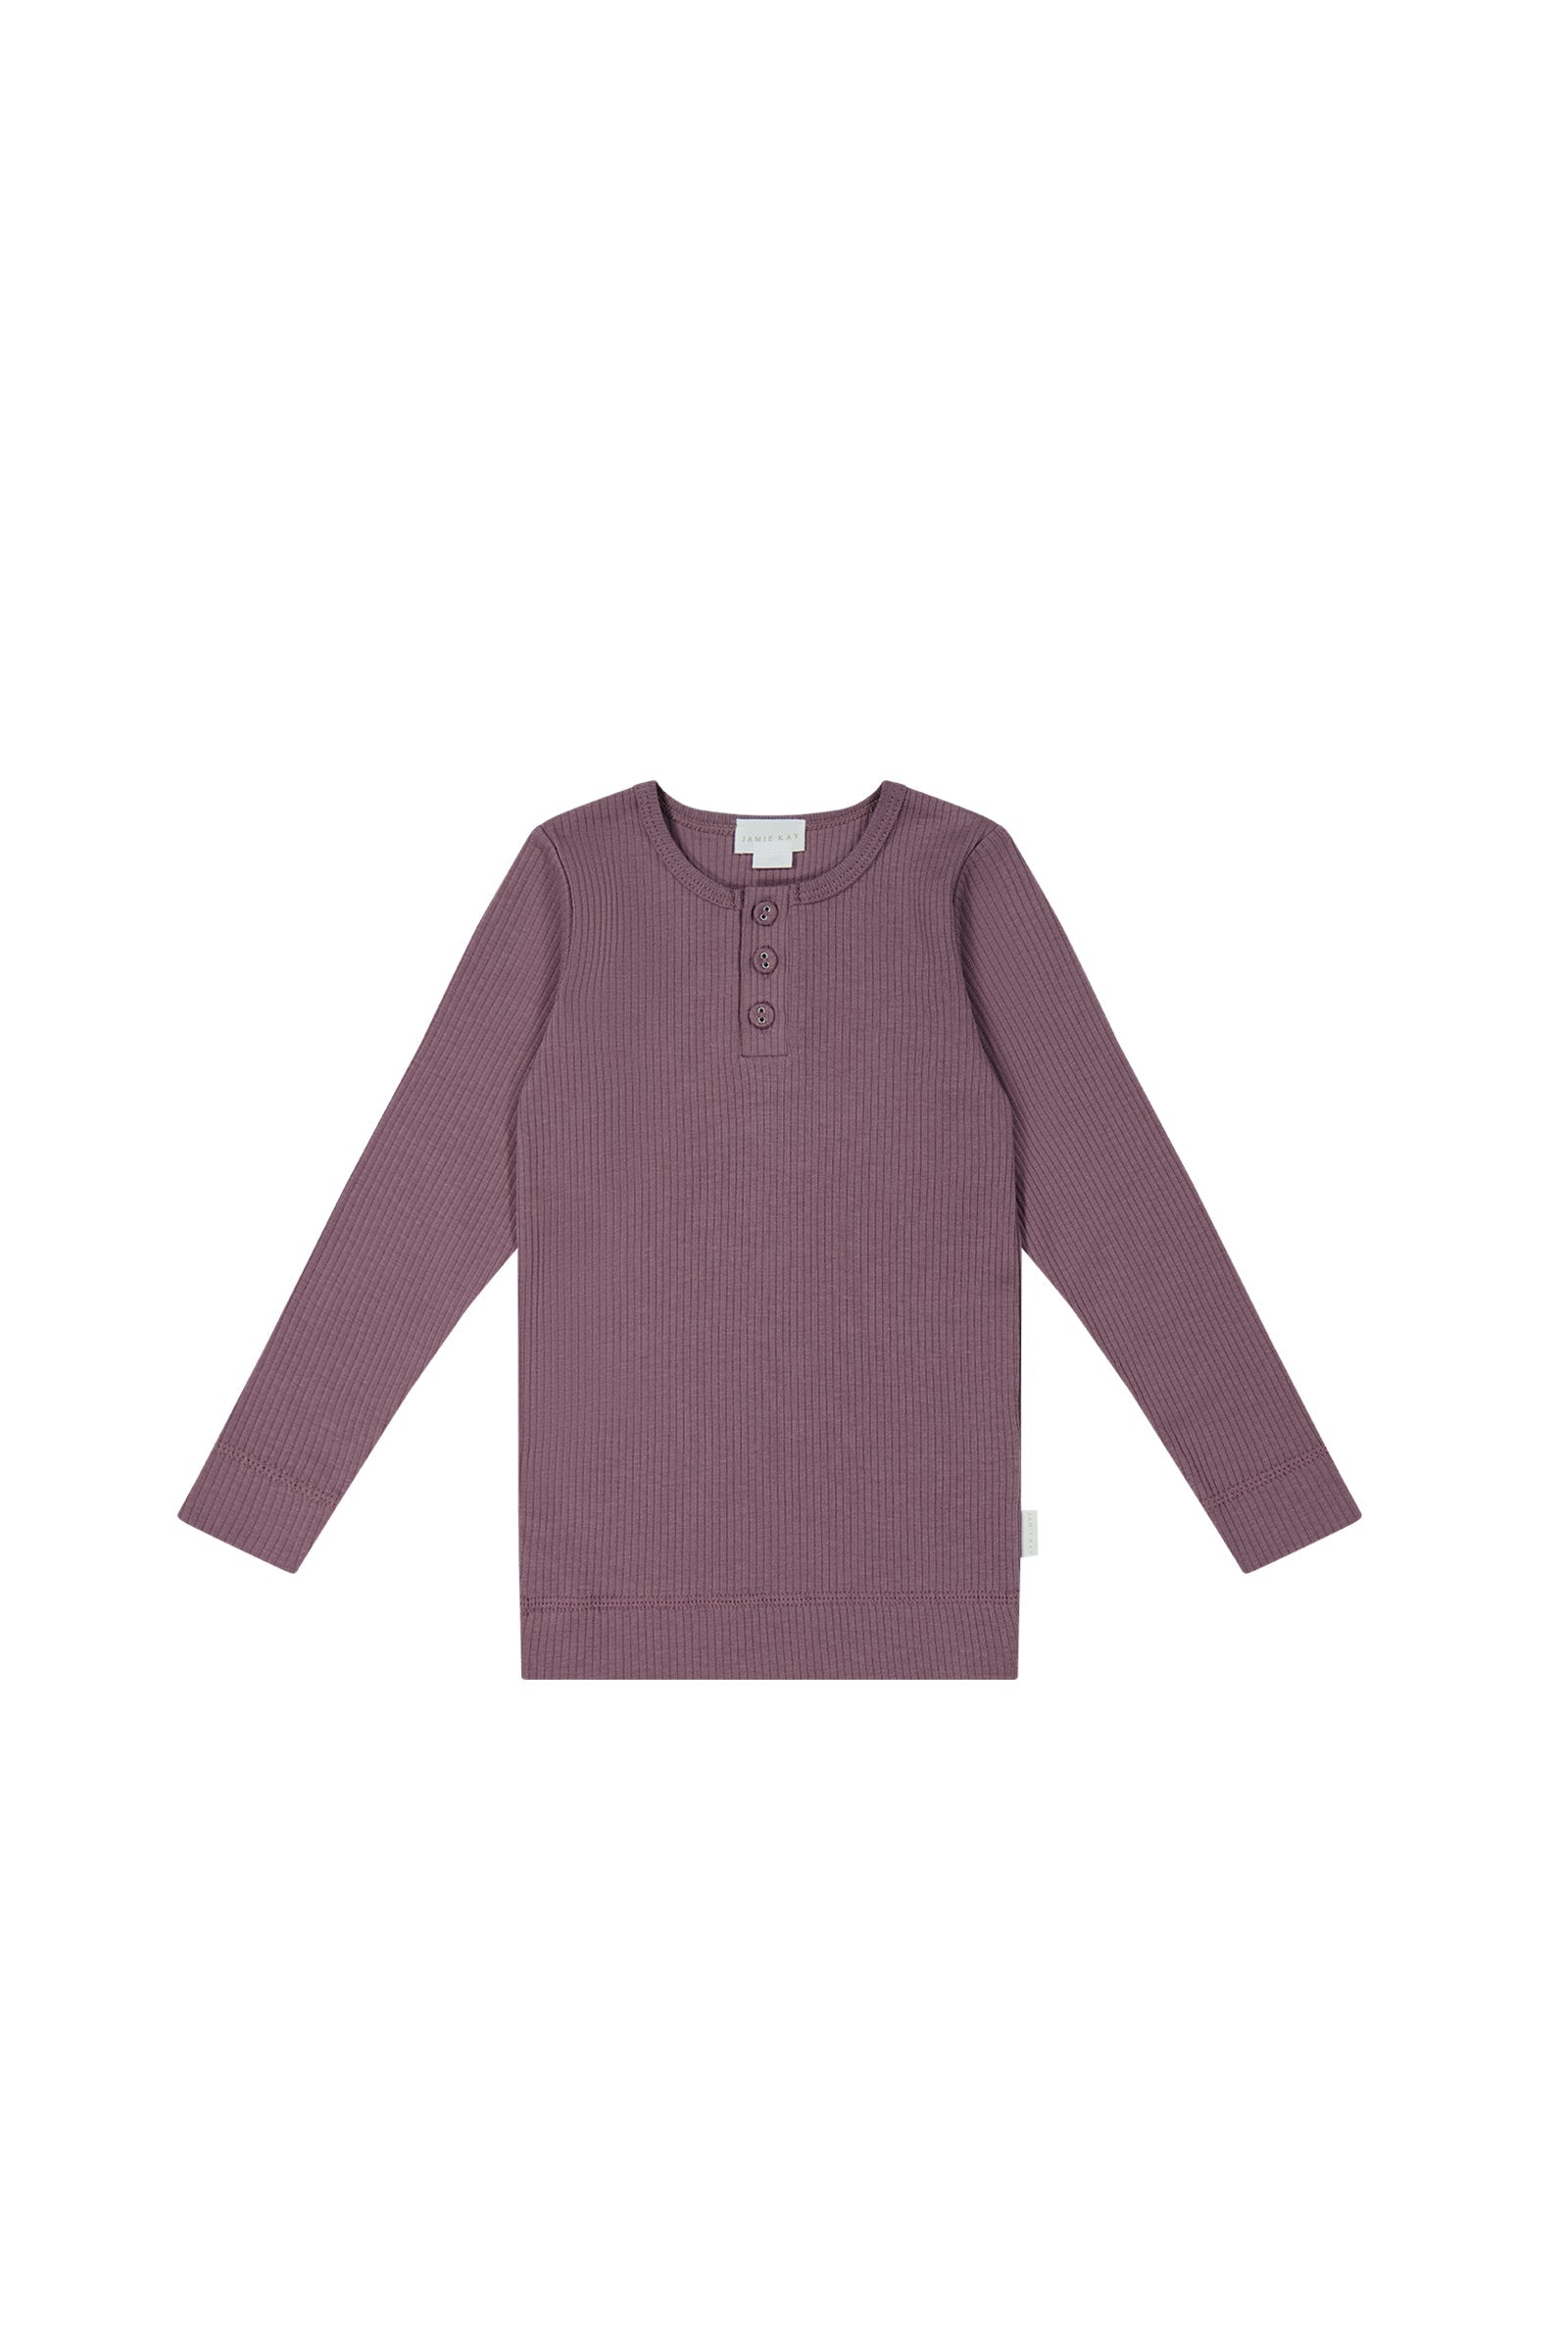 Organic Cotton Modal Long Sleeve Henley - Mauve-Clothing & Accessories-Jamie Kay-The Bay Room